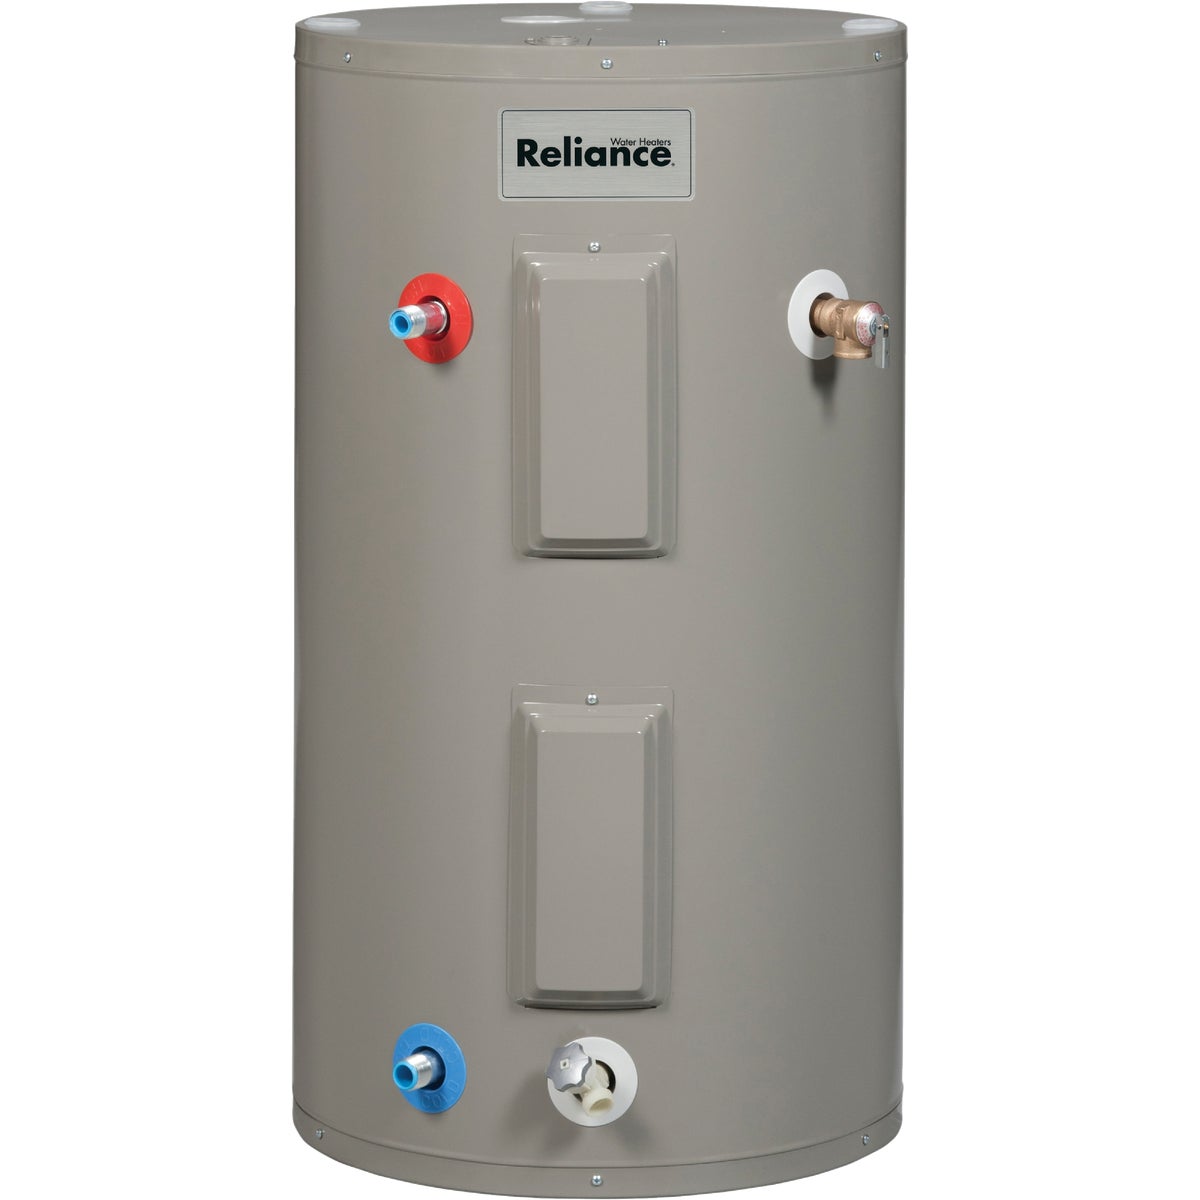 Reliance 40 Gal. 6yr 3800/3800W Element Electric Water Heater for Mobile Home